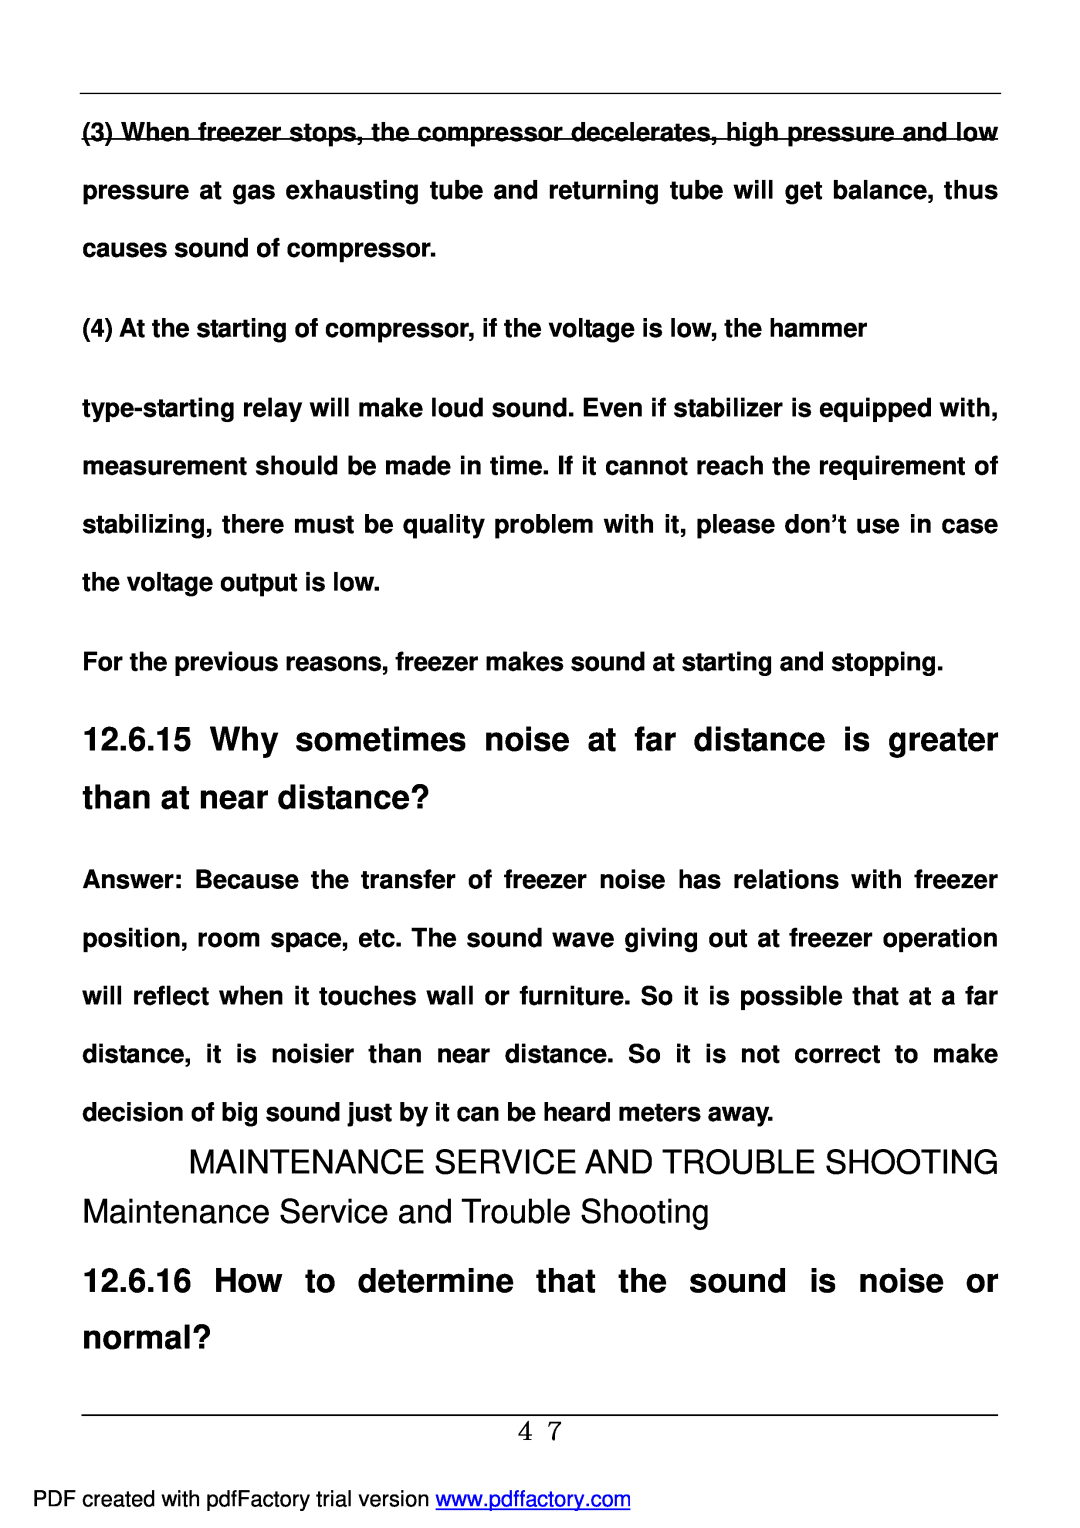 Haier BD-478A service manual How to determine that the sound is noise or normal? 